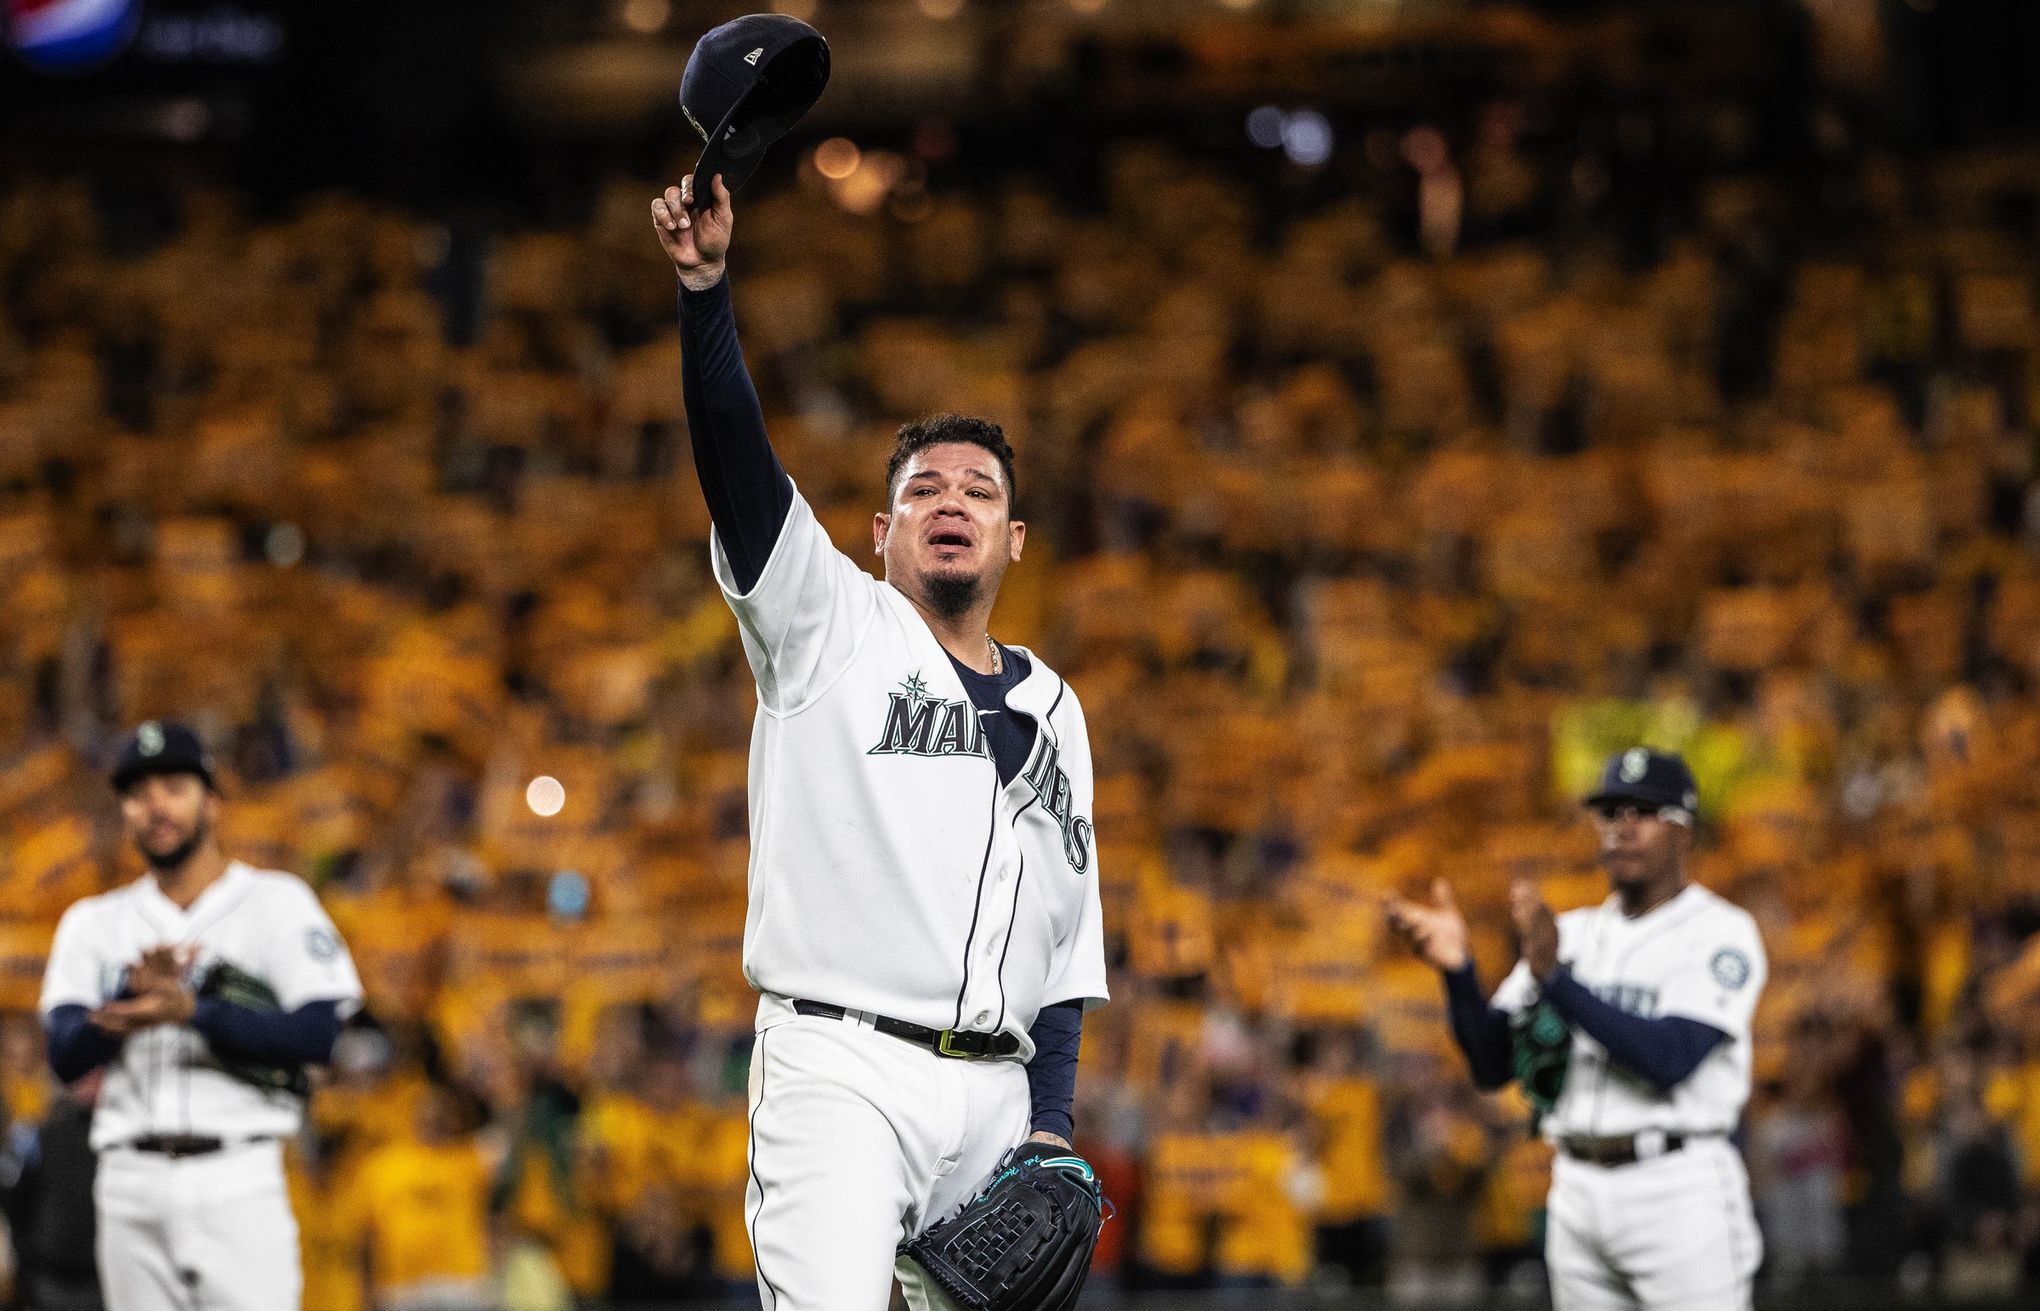 Felix Hernandez signs record deal with Mariners